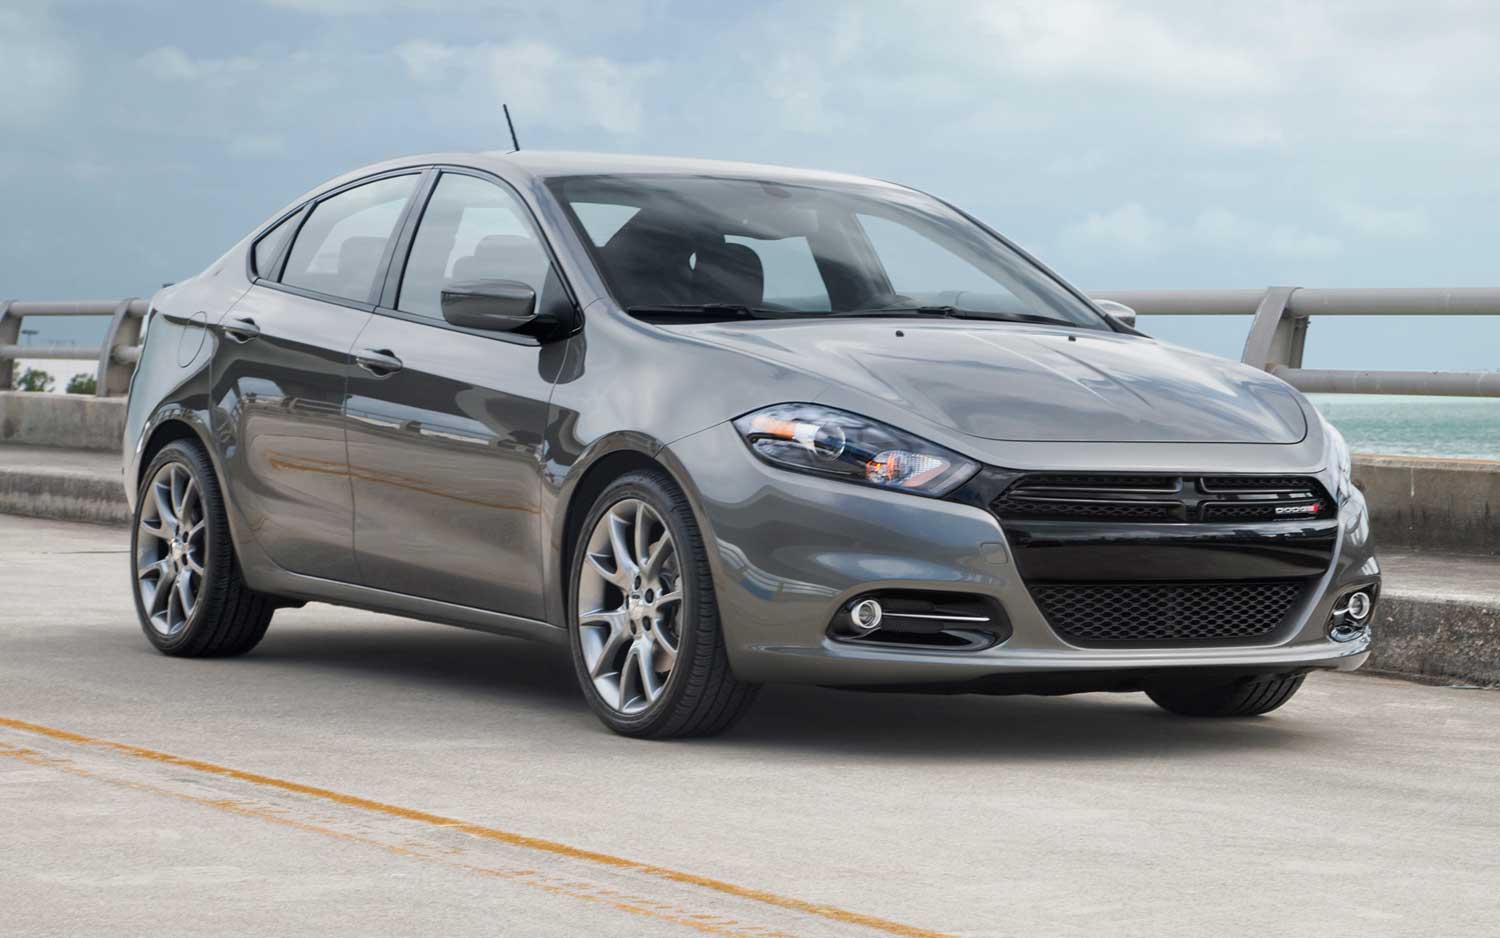 2013 Dodge Dart Adds New Special-Edition Packages